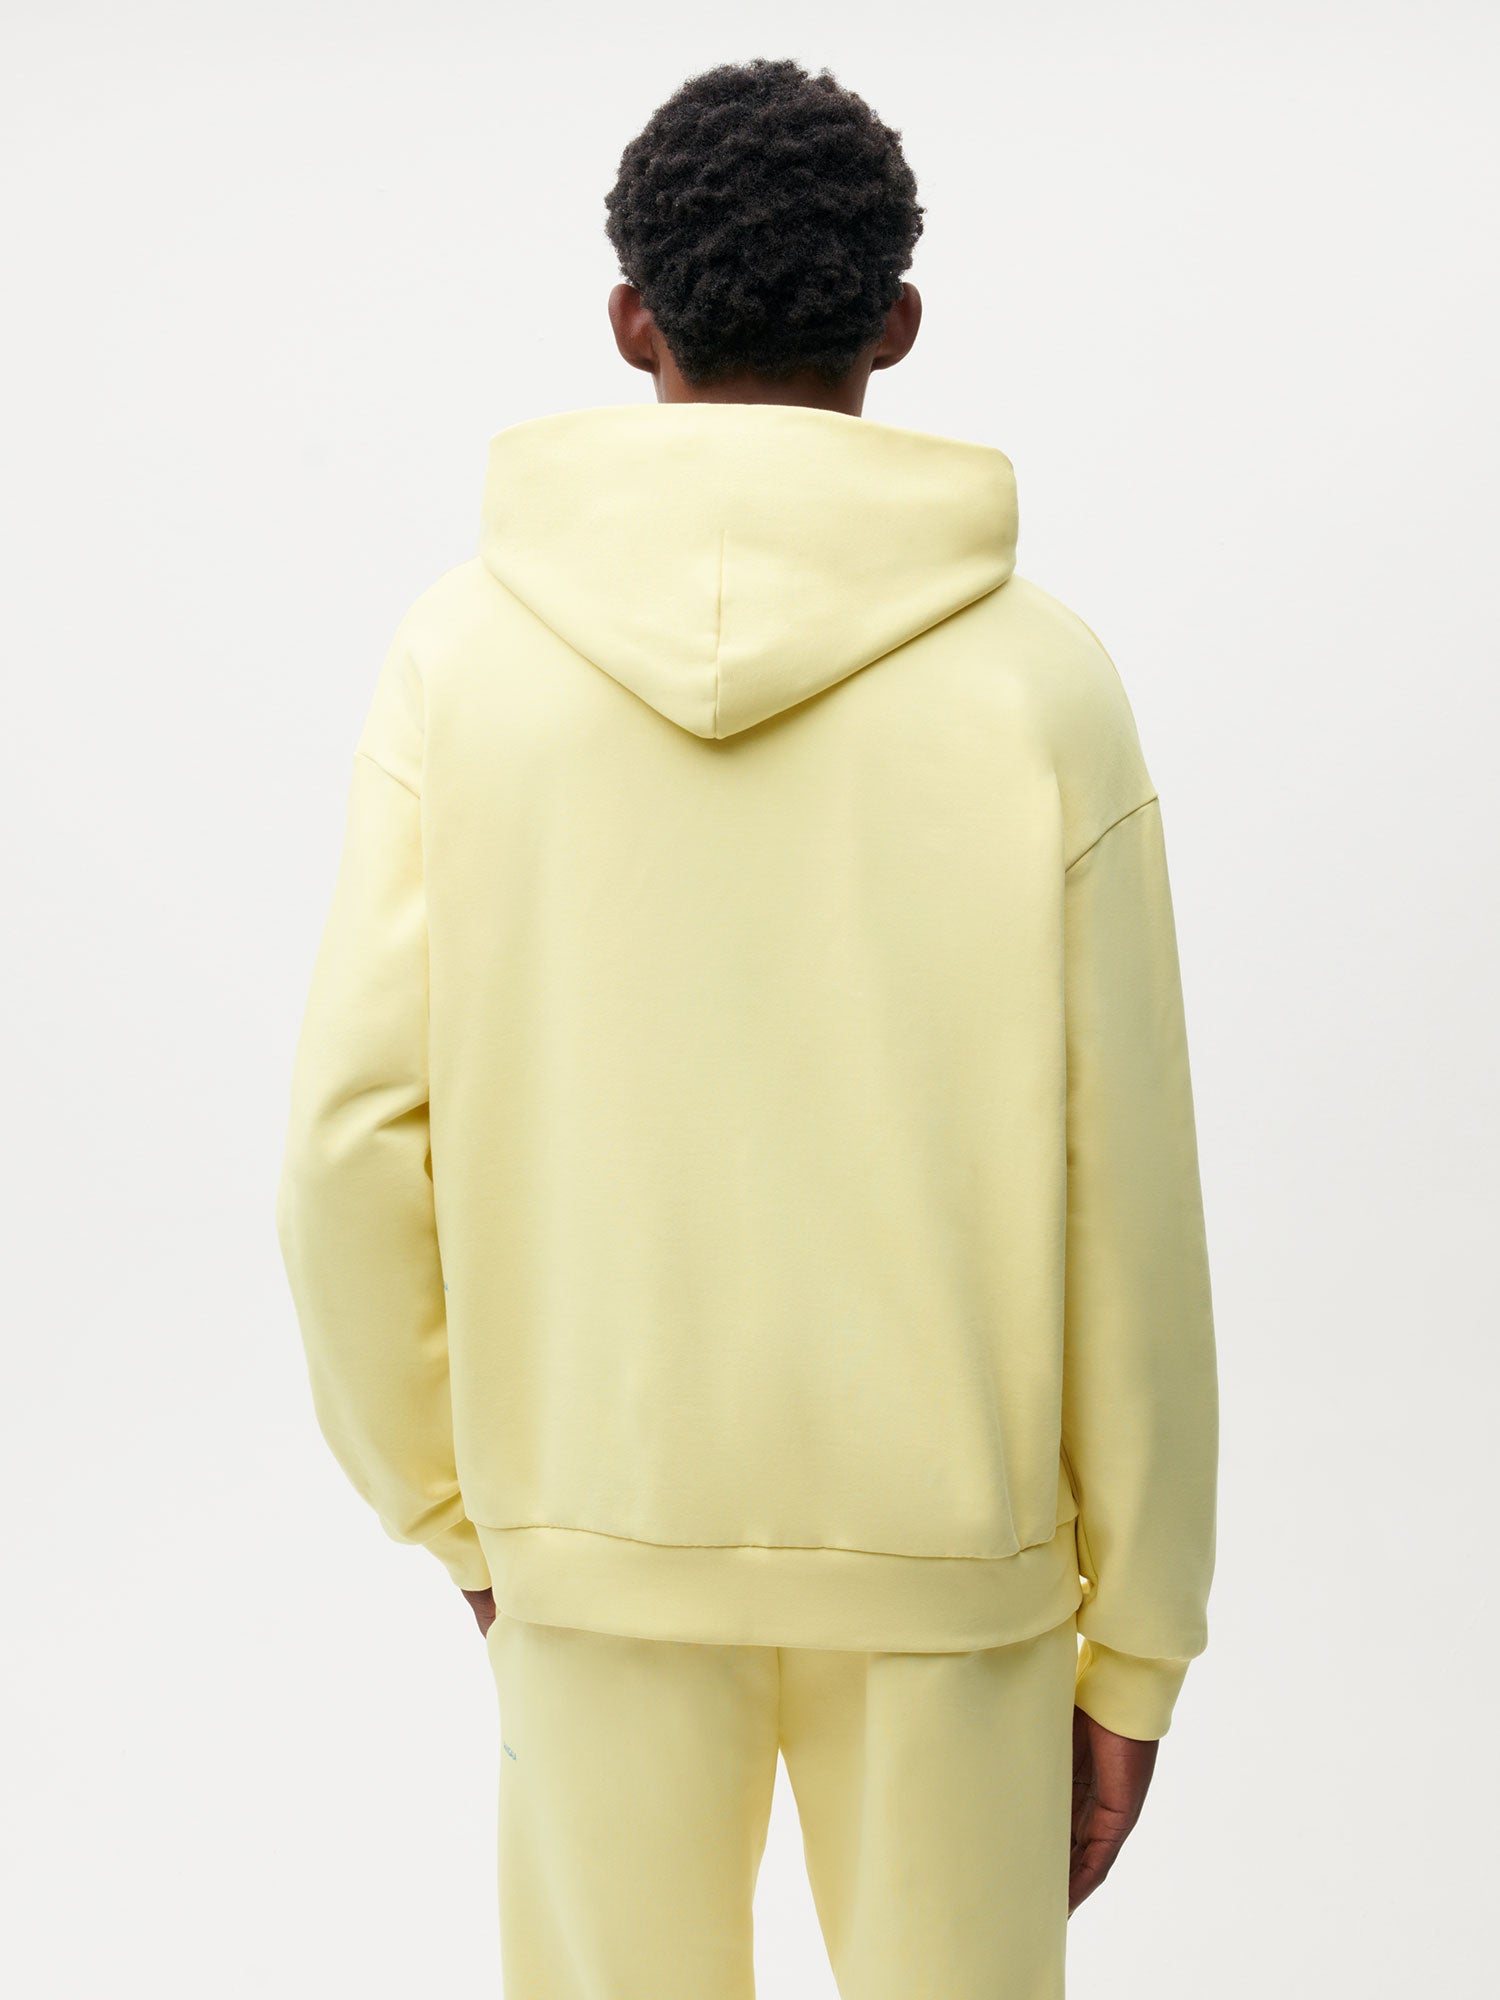 In-Conversion-Cotton-Hoodie-Sunbeam-Yellow-Male-2